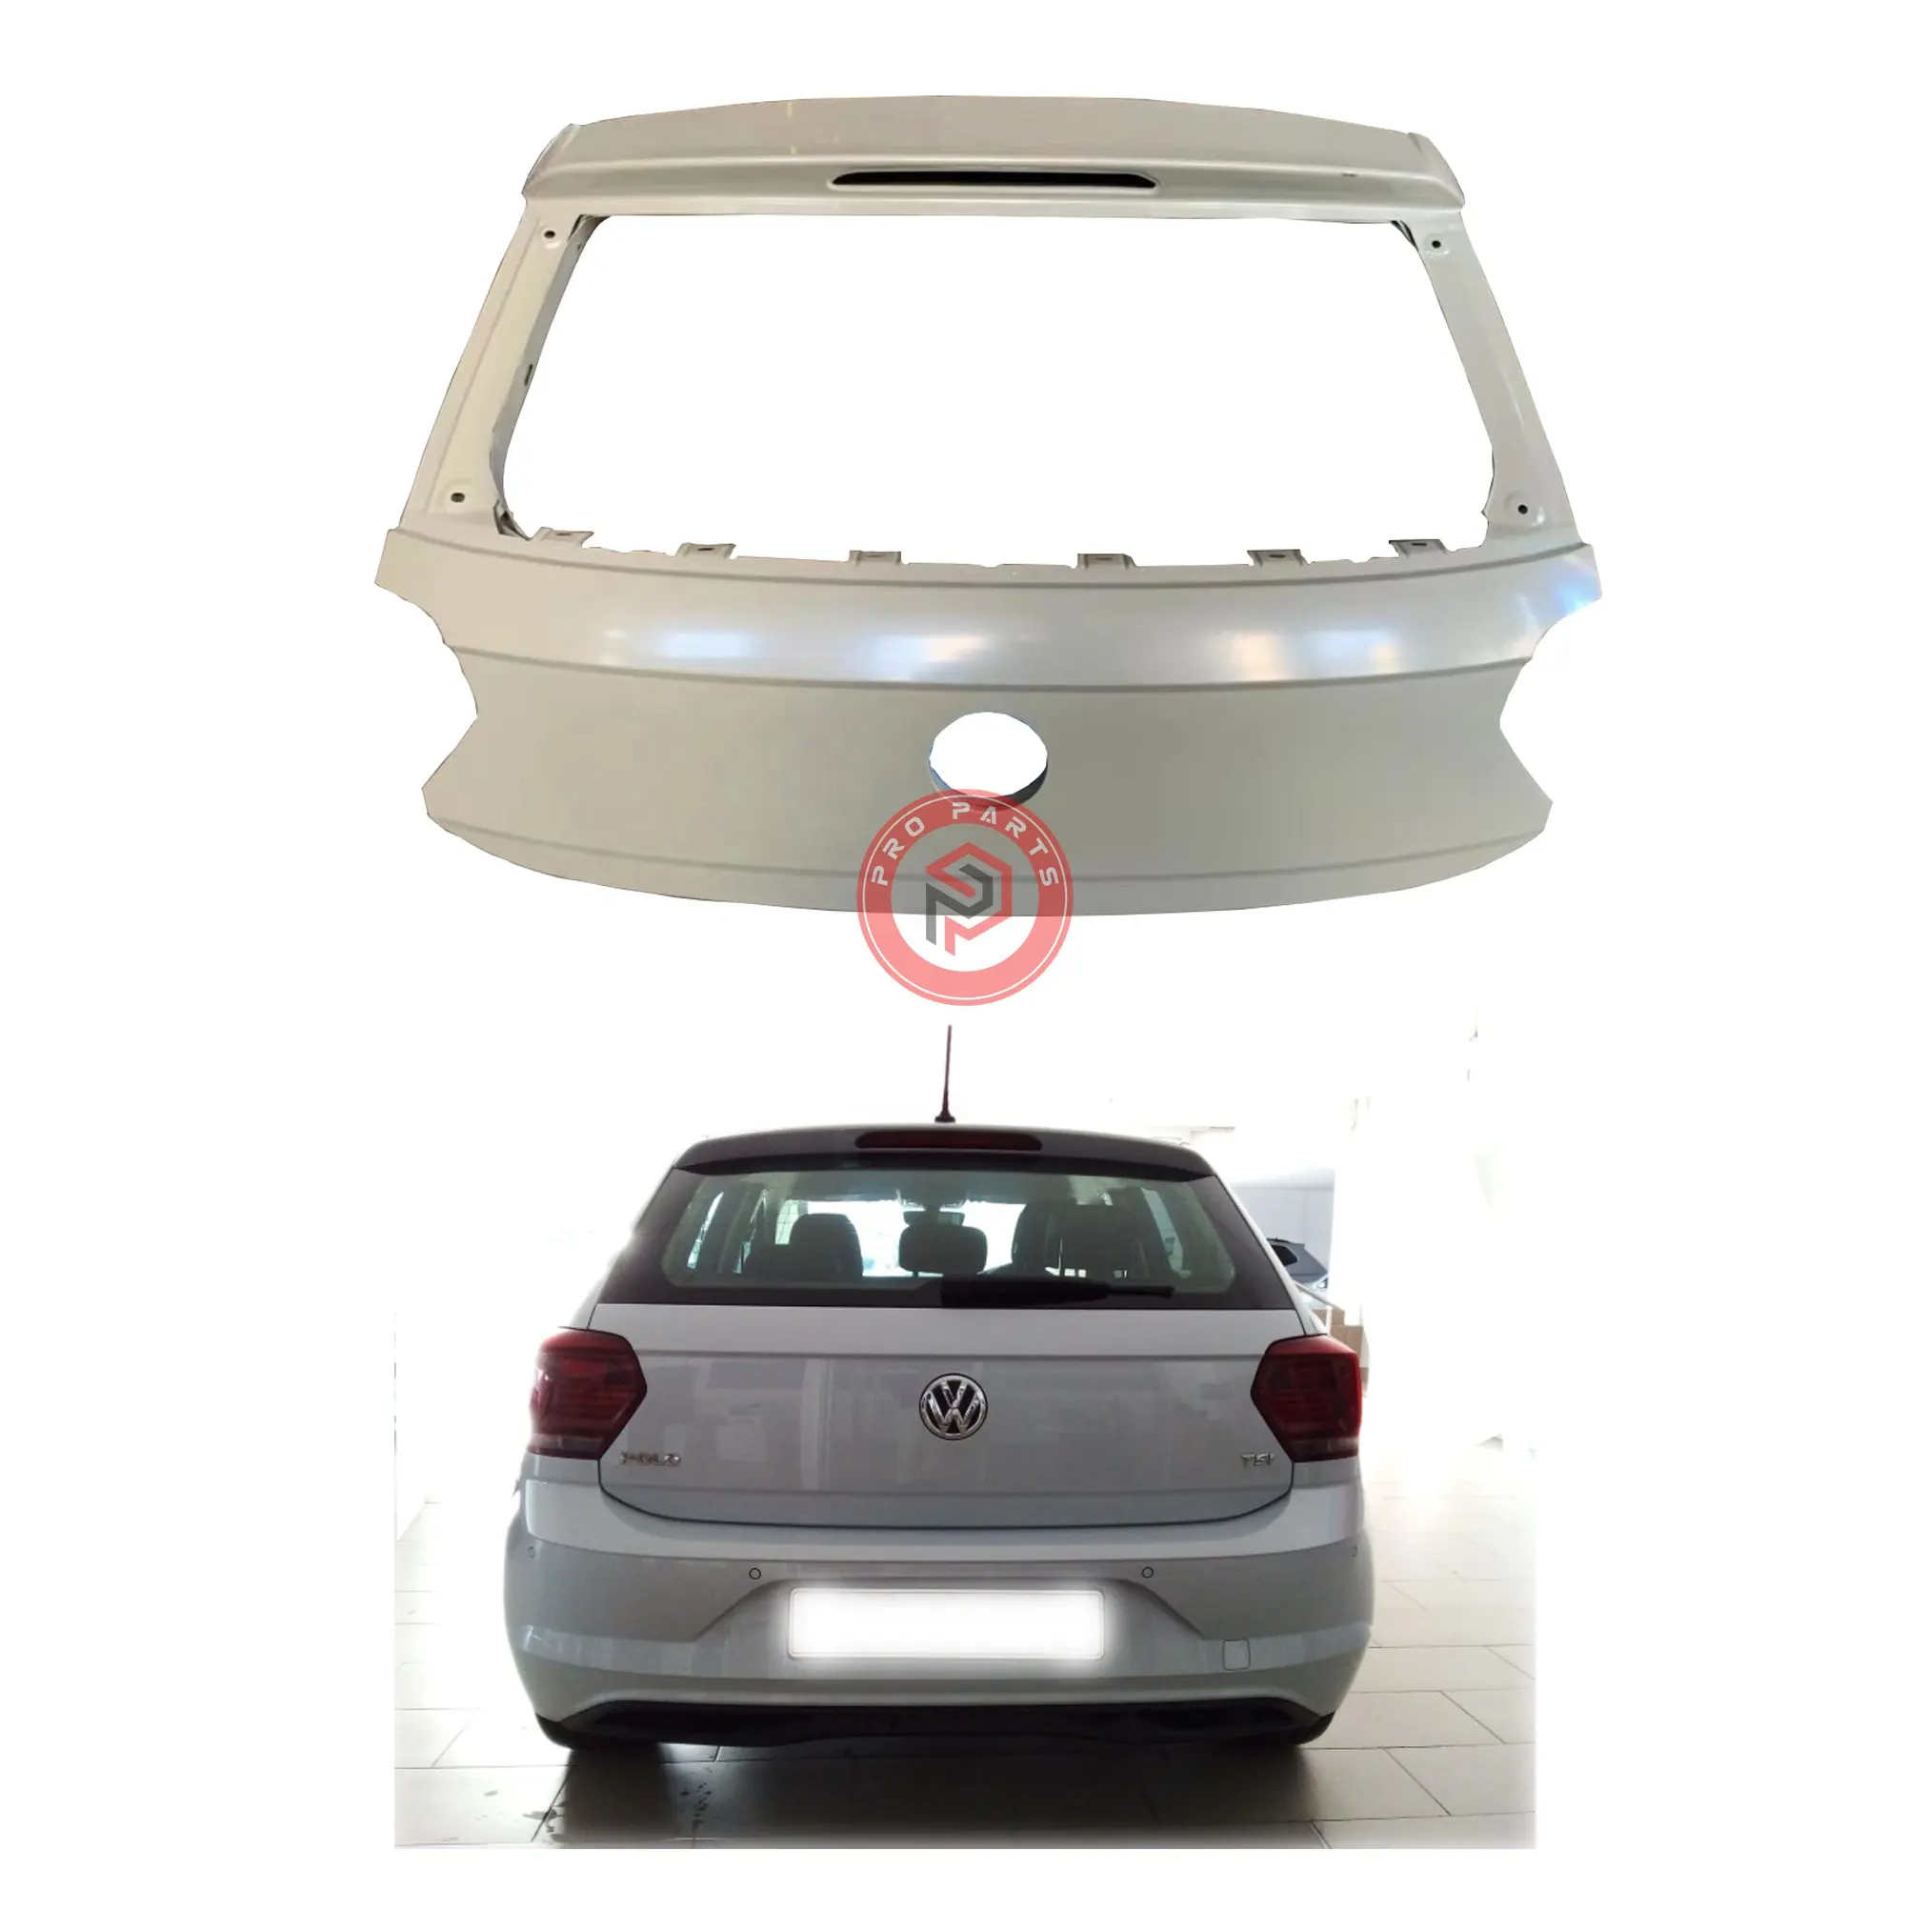 Pro Vw Polo Car Bodyparts Hatchback Tailgate For Vw Polo Oem 2SD827025